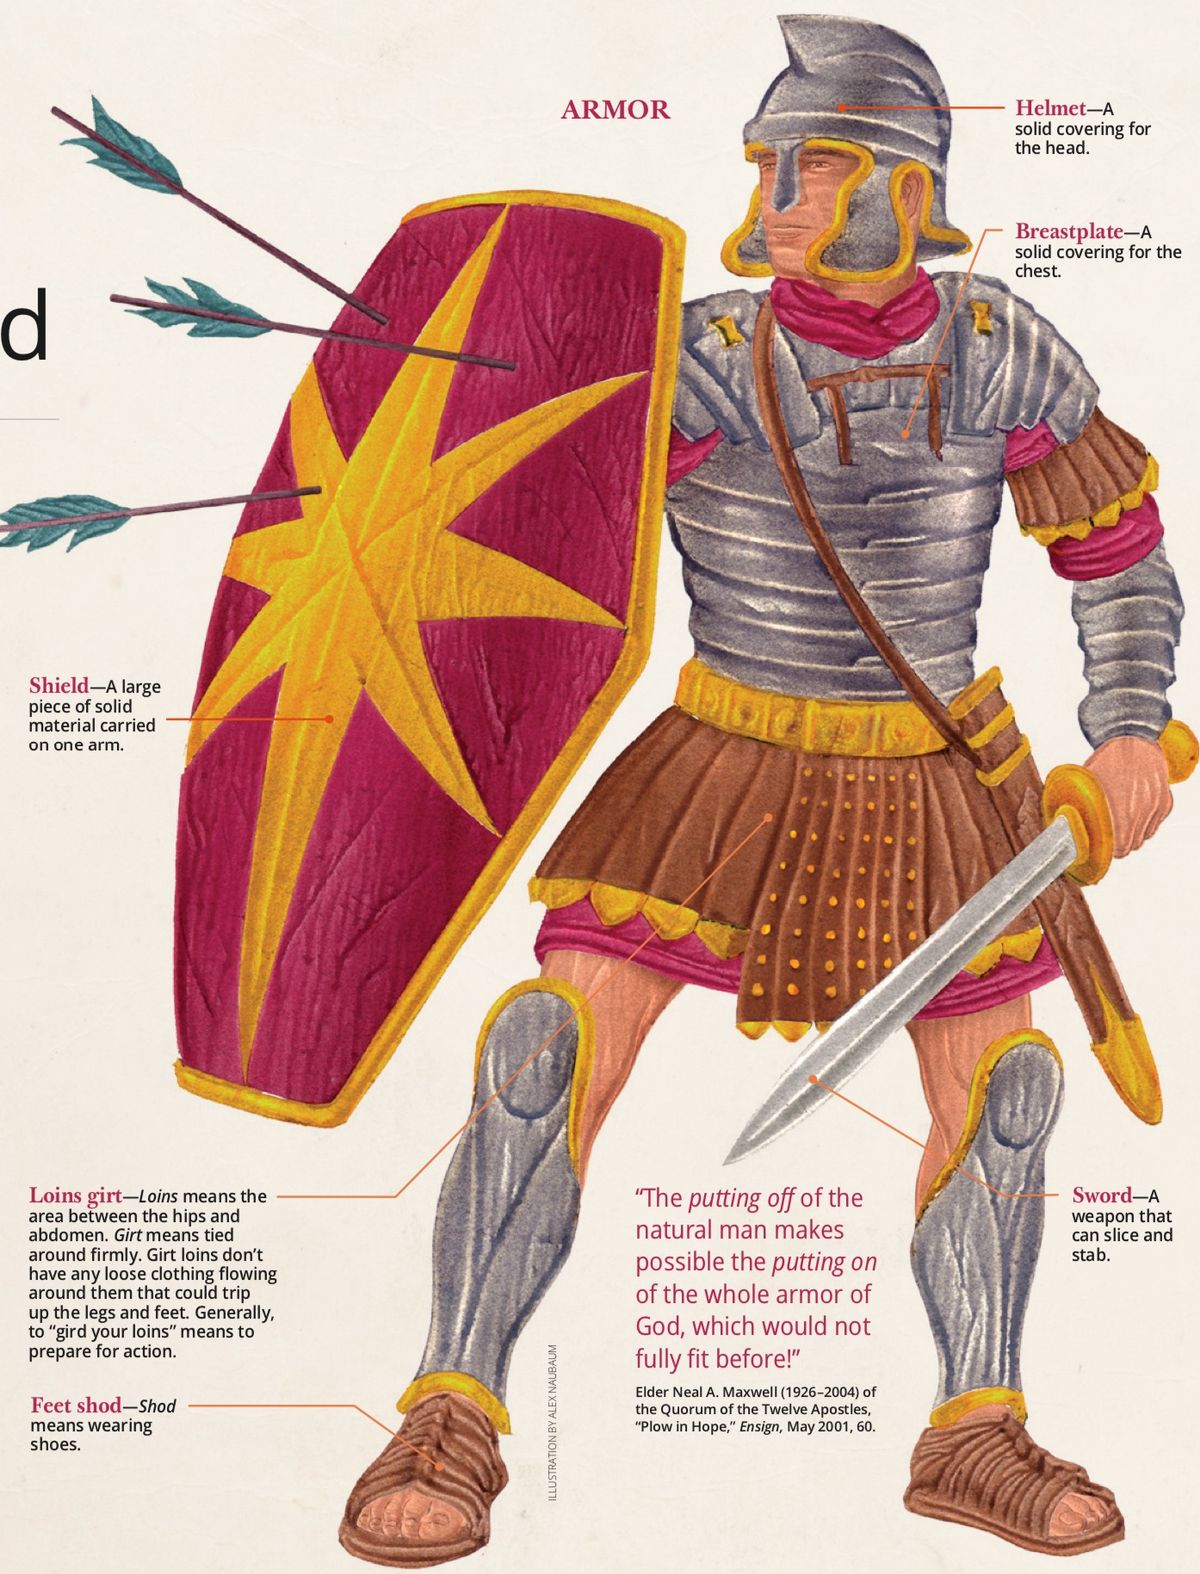 Vacation Bible School: Putting On the Full Armor of God